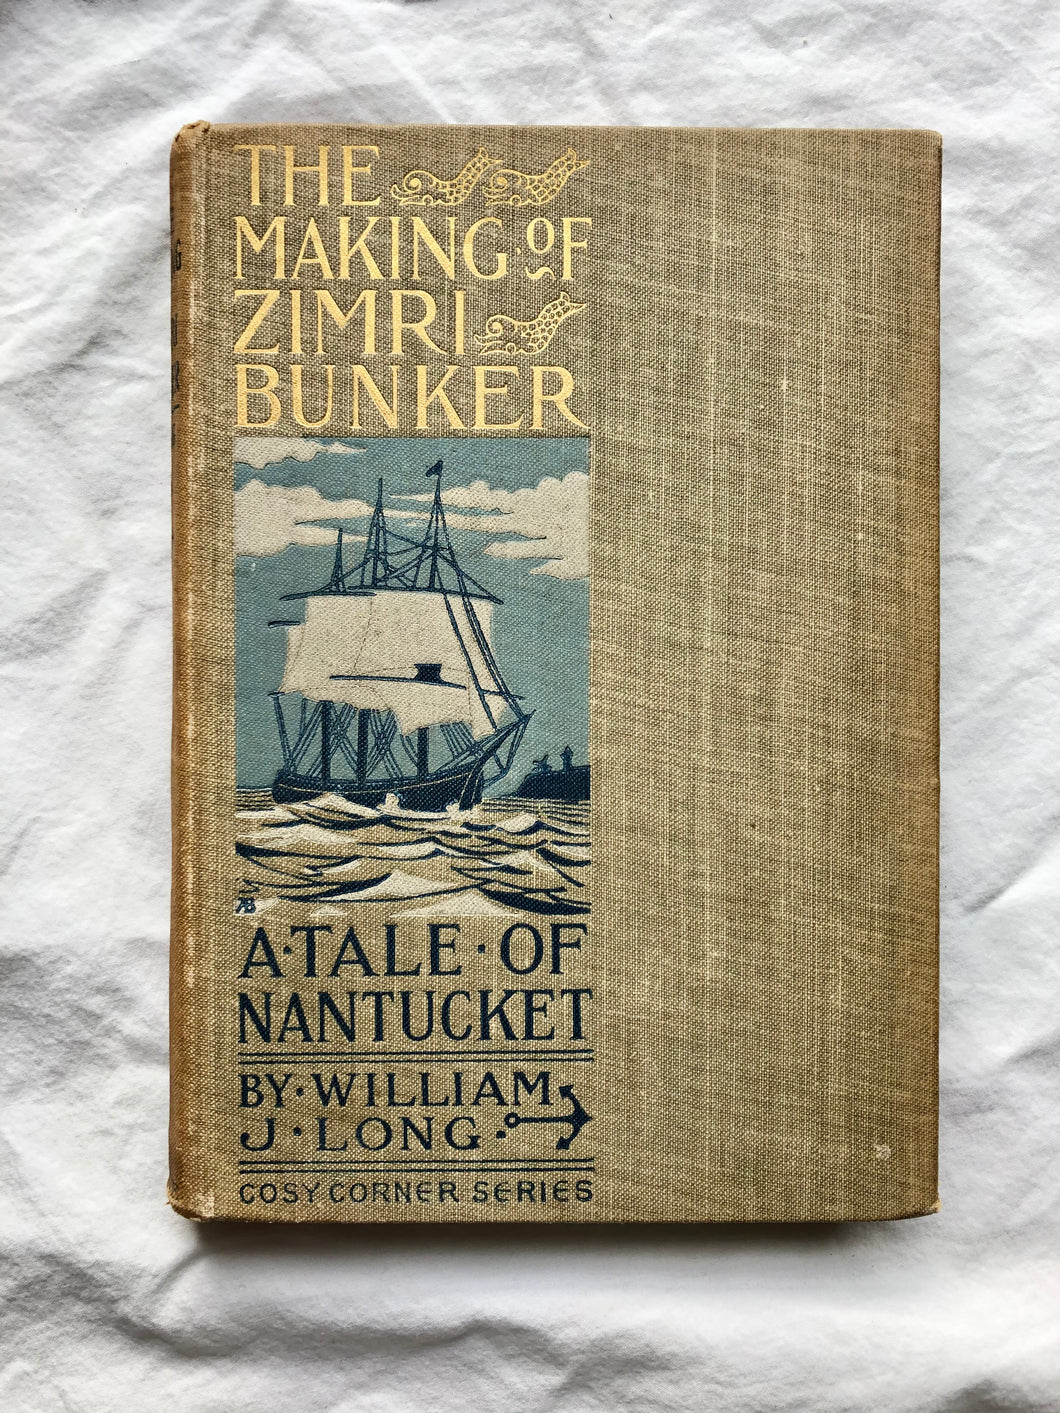 “The Making of Zimri Bunker: A Story of Nantucket in the Early Days” by William J. Long and illustrated by B. Rosenmeyer